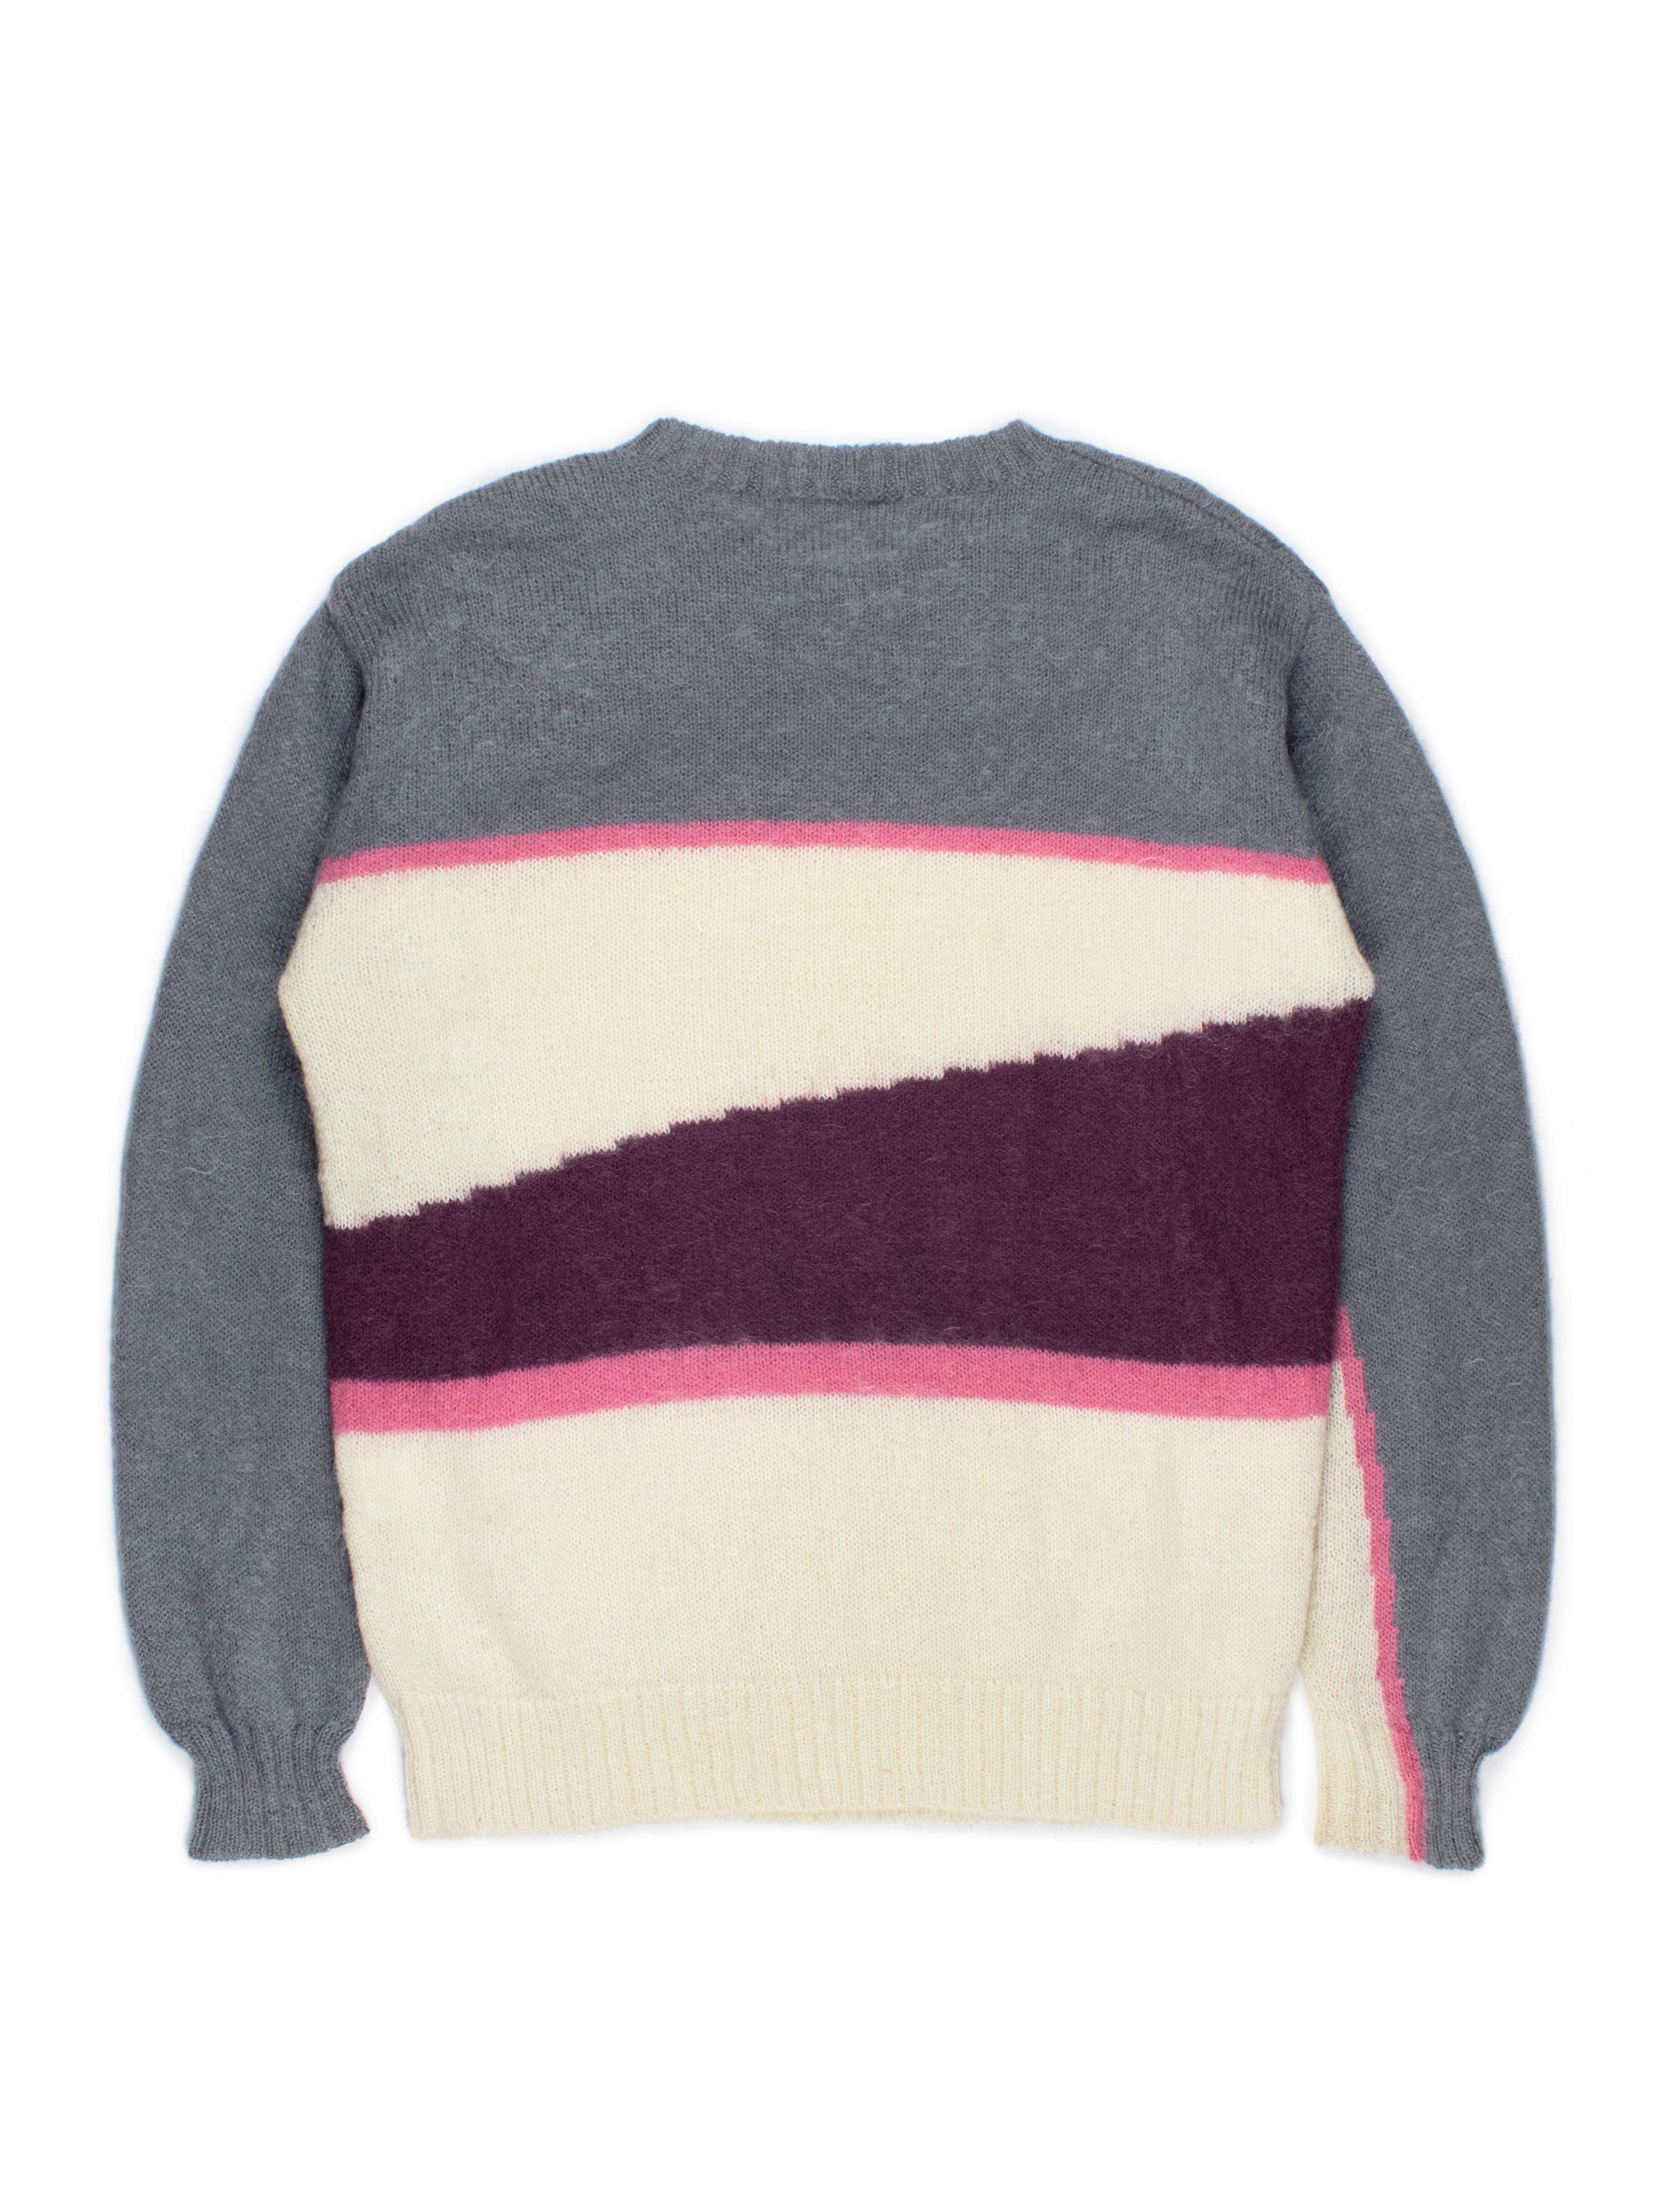 Gray General Research 1997 Mohair Sweater